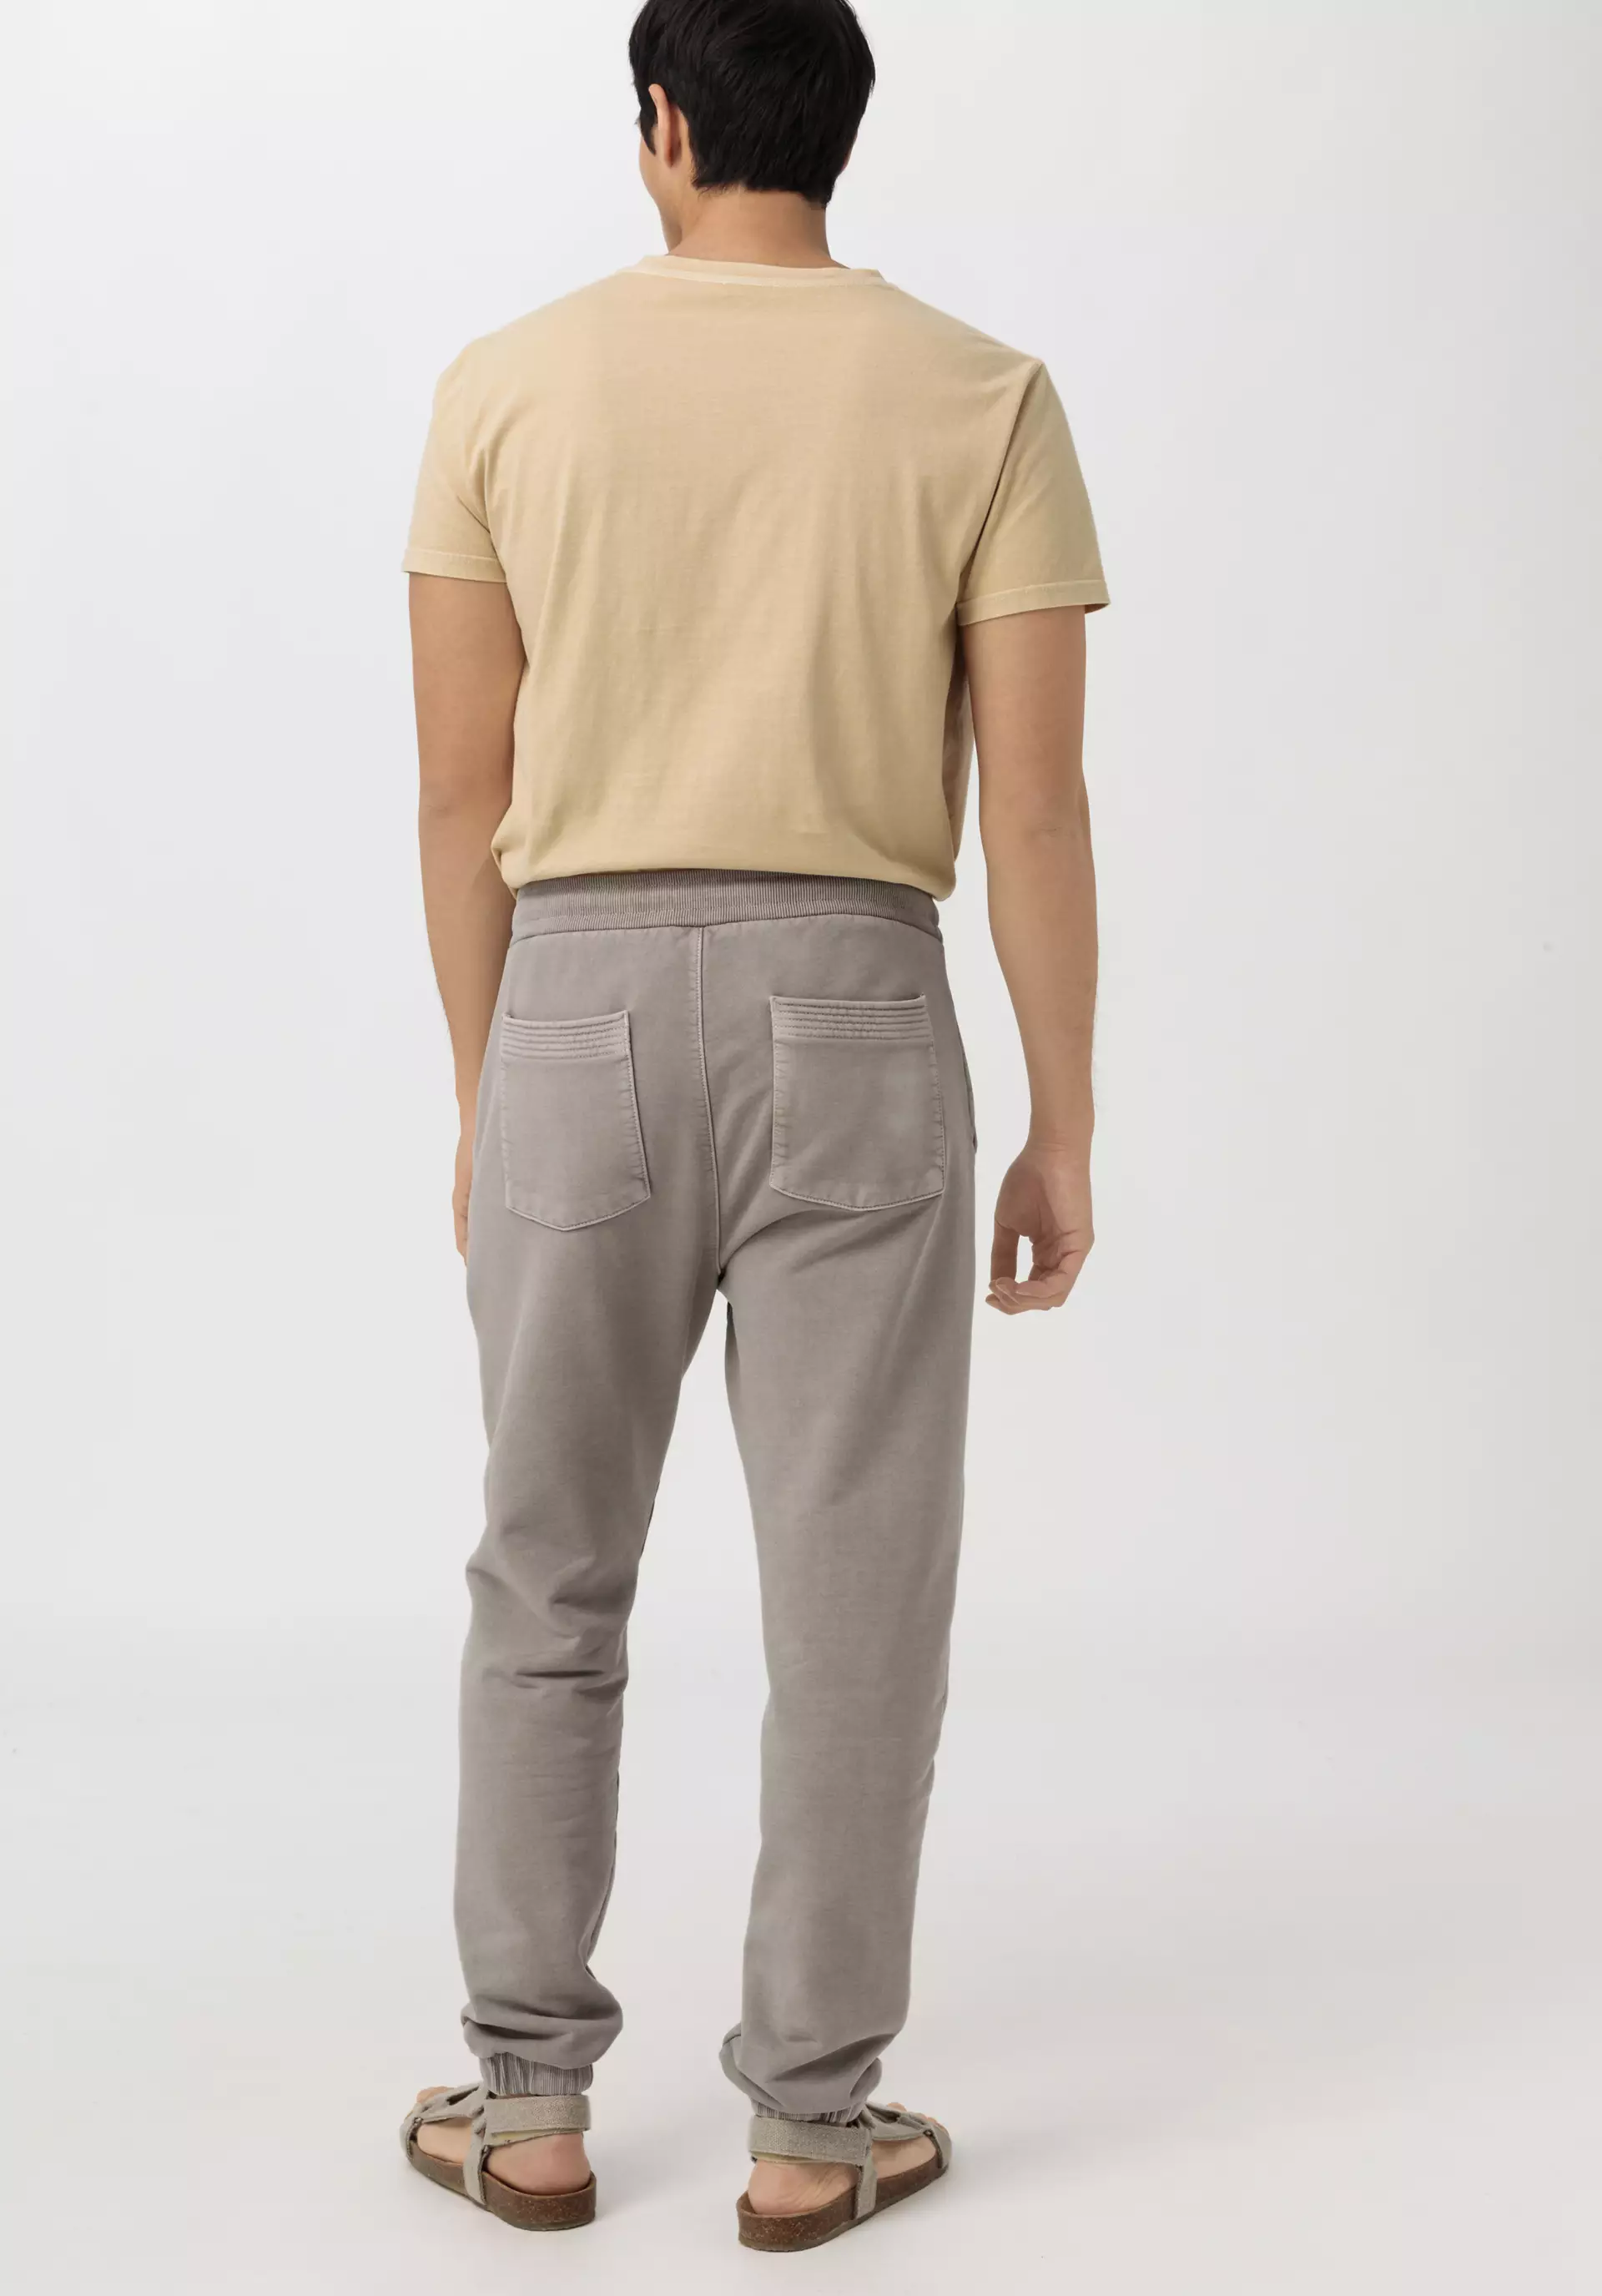 Jogging pants, mineral-dyed, made of pure organic cotton - 3